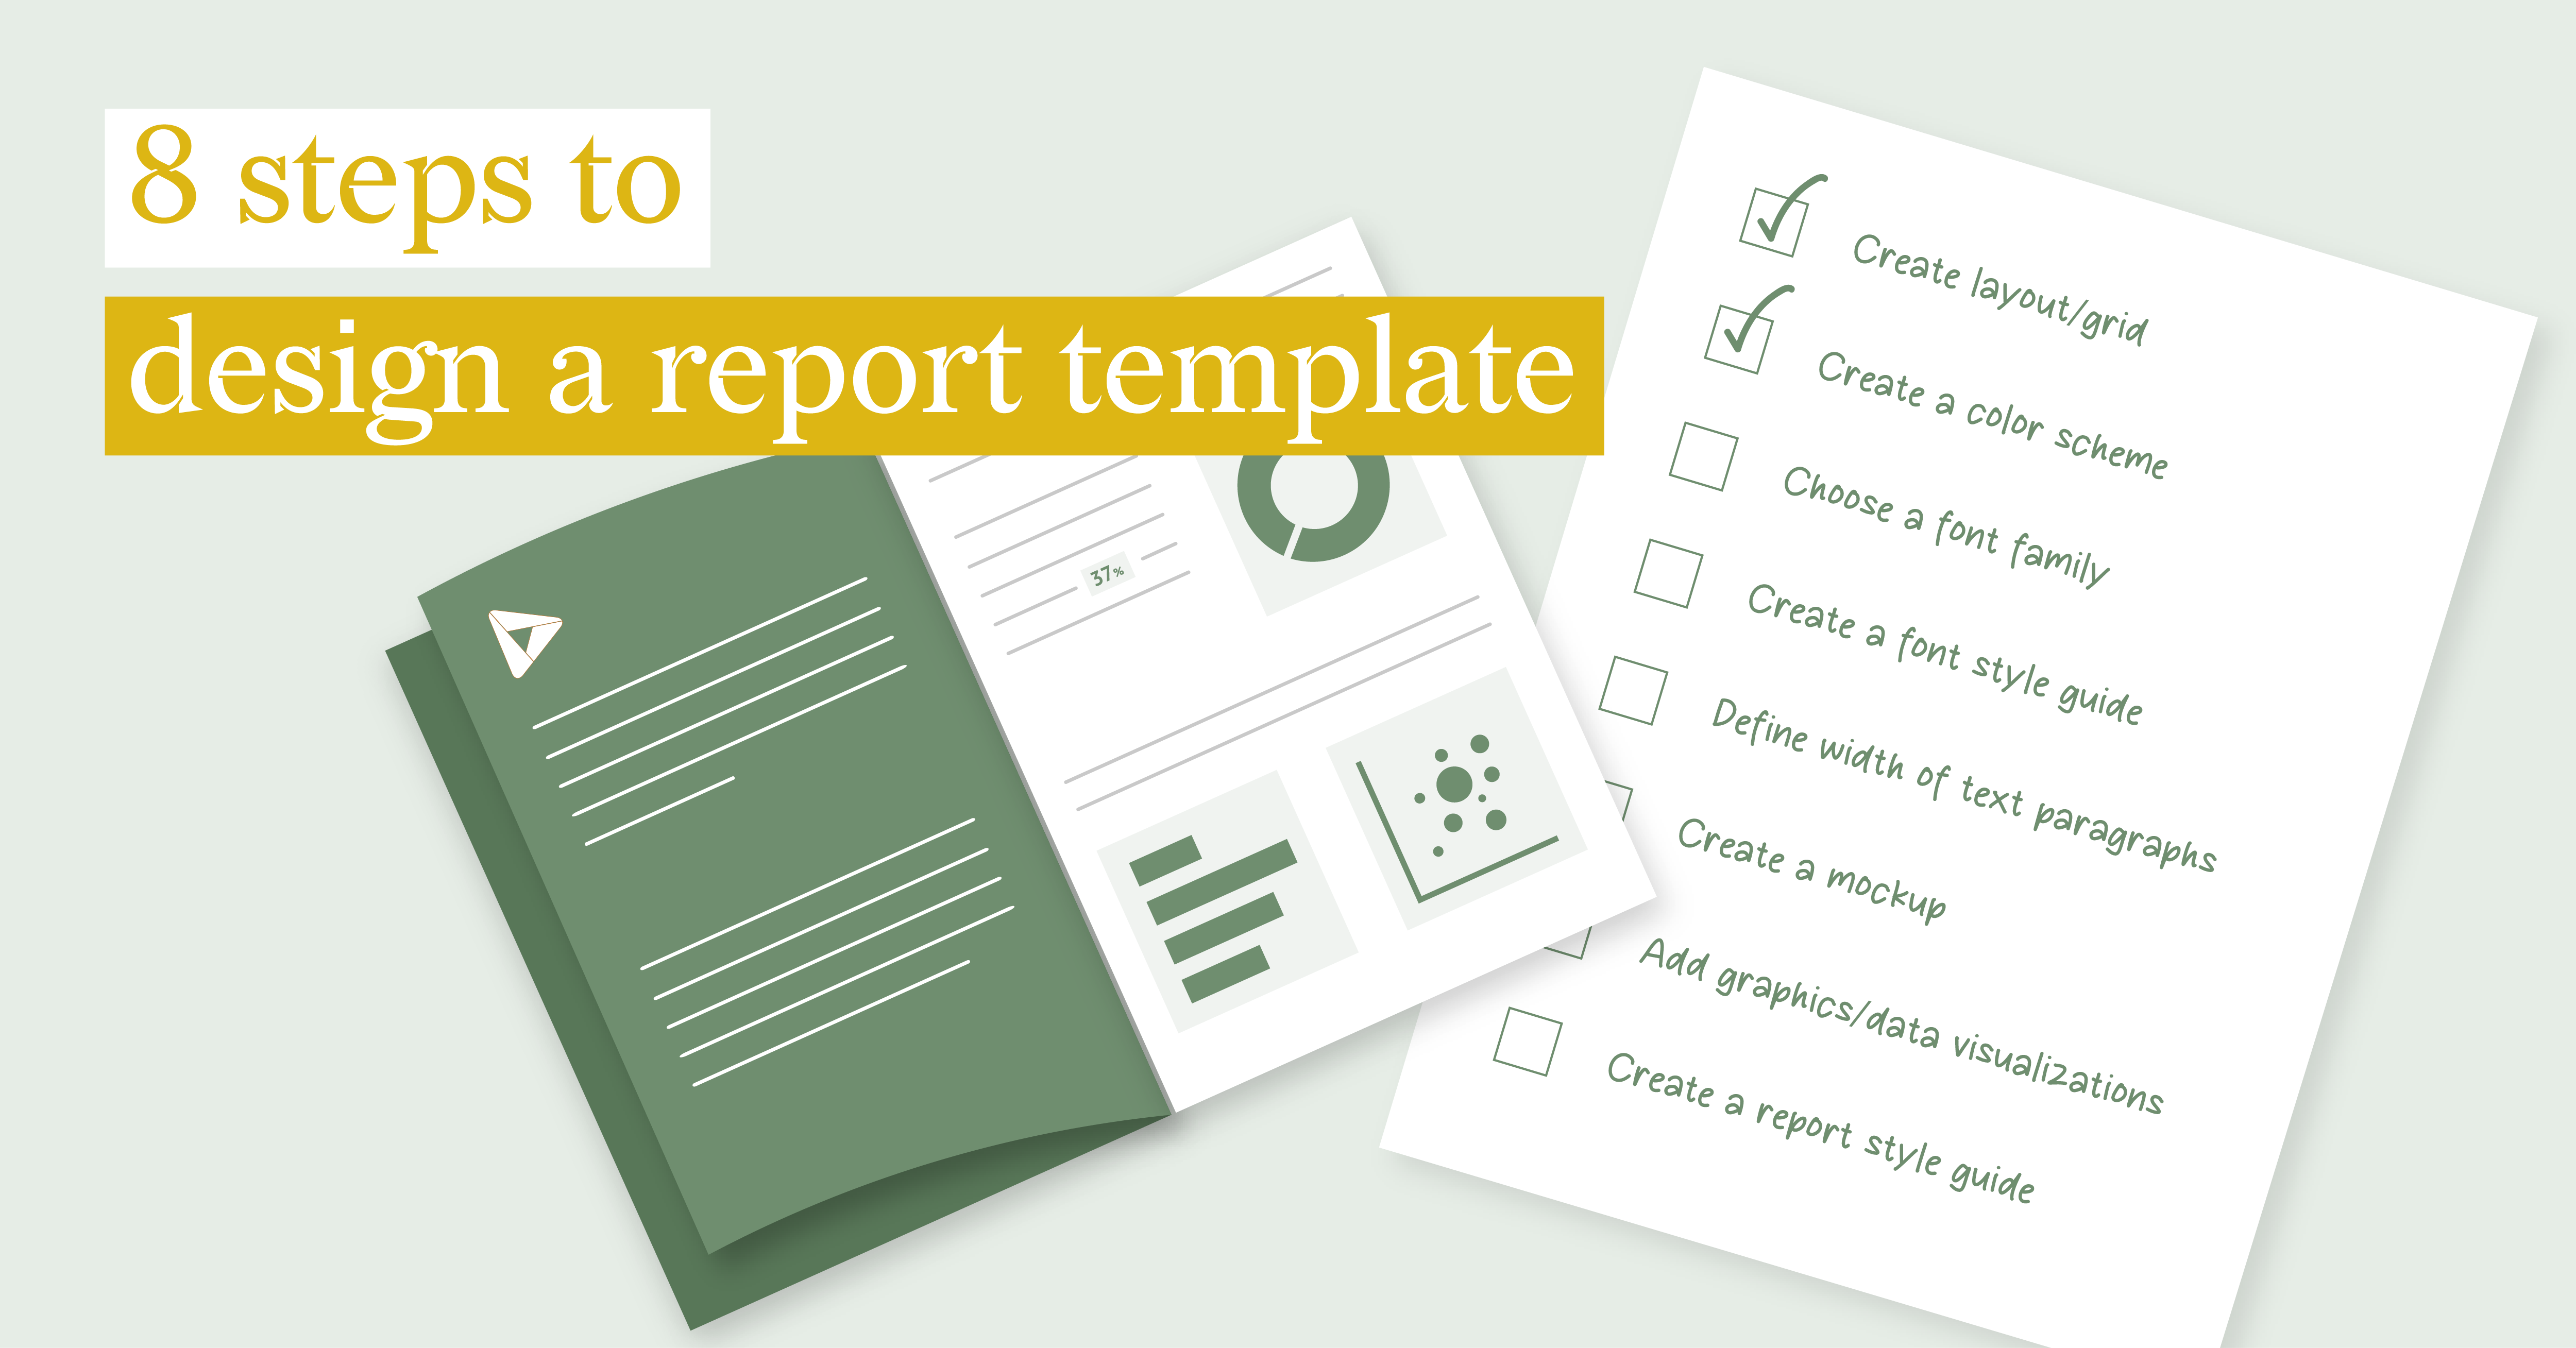 datylon-blog-8-steps-to-design-a-report-template-featured-image